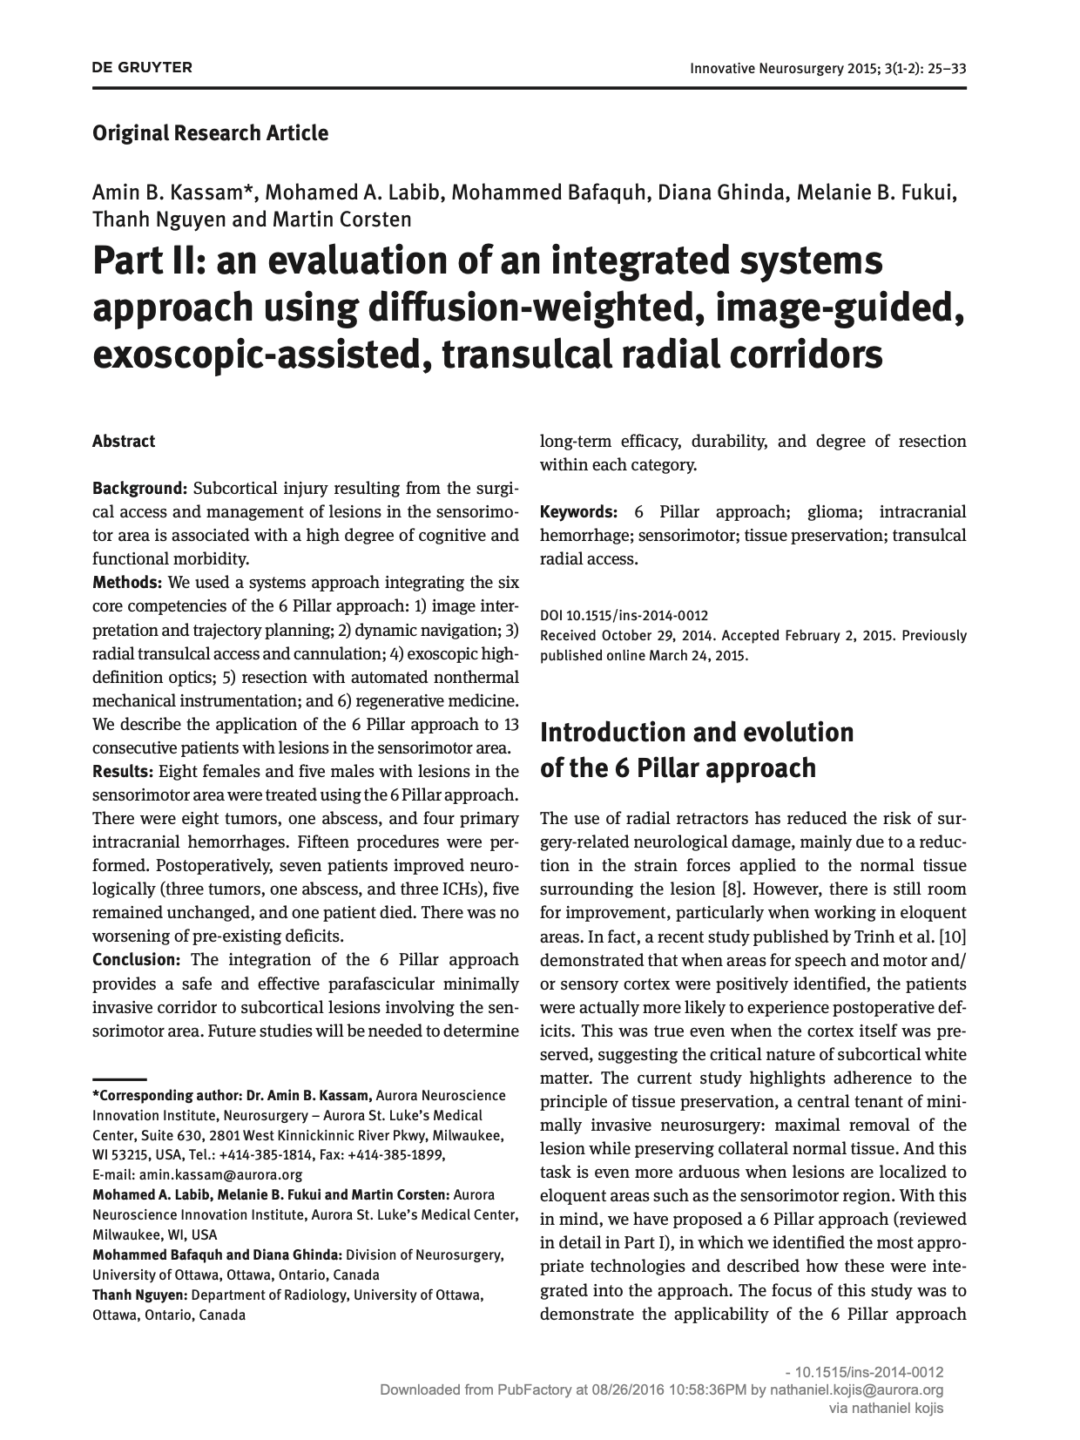 Part II: an evaluation of an integrated systems approach using diffusion-weighted, image-guided, exoscopic-assisted, transulcal radial corridors